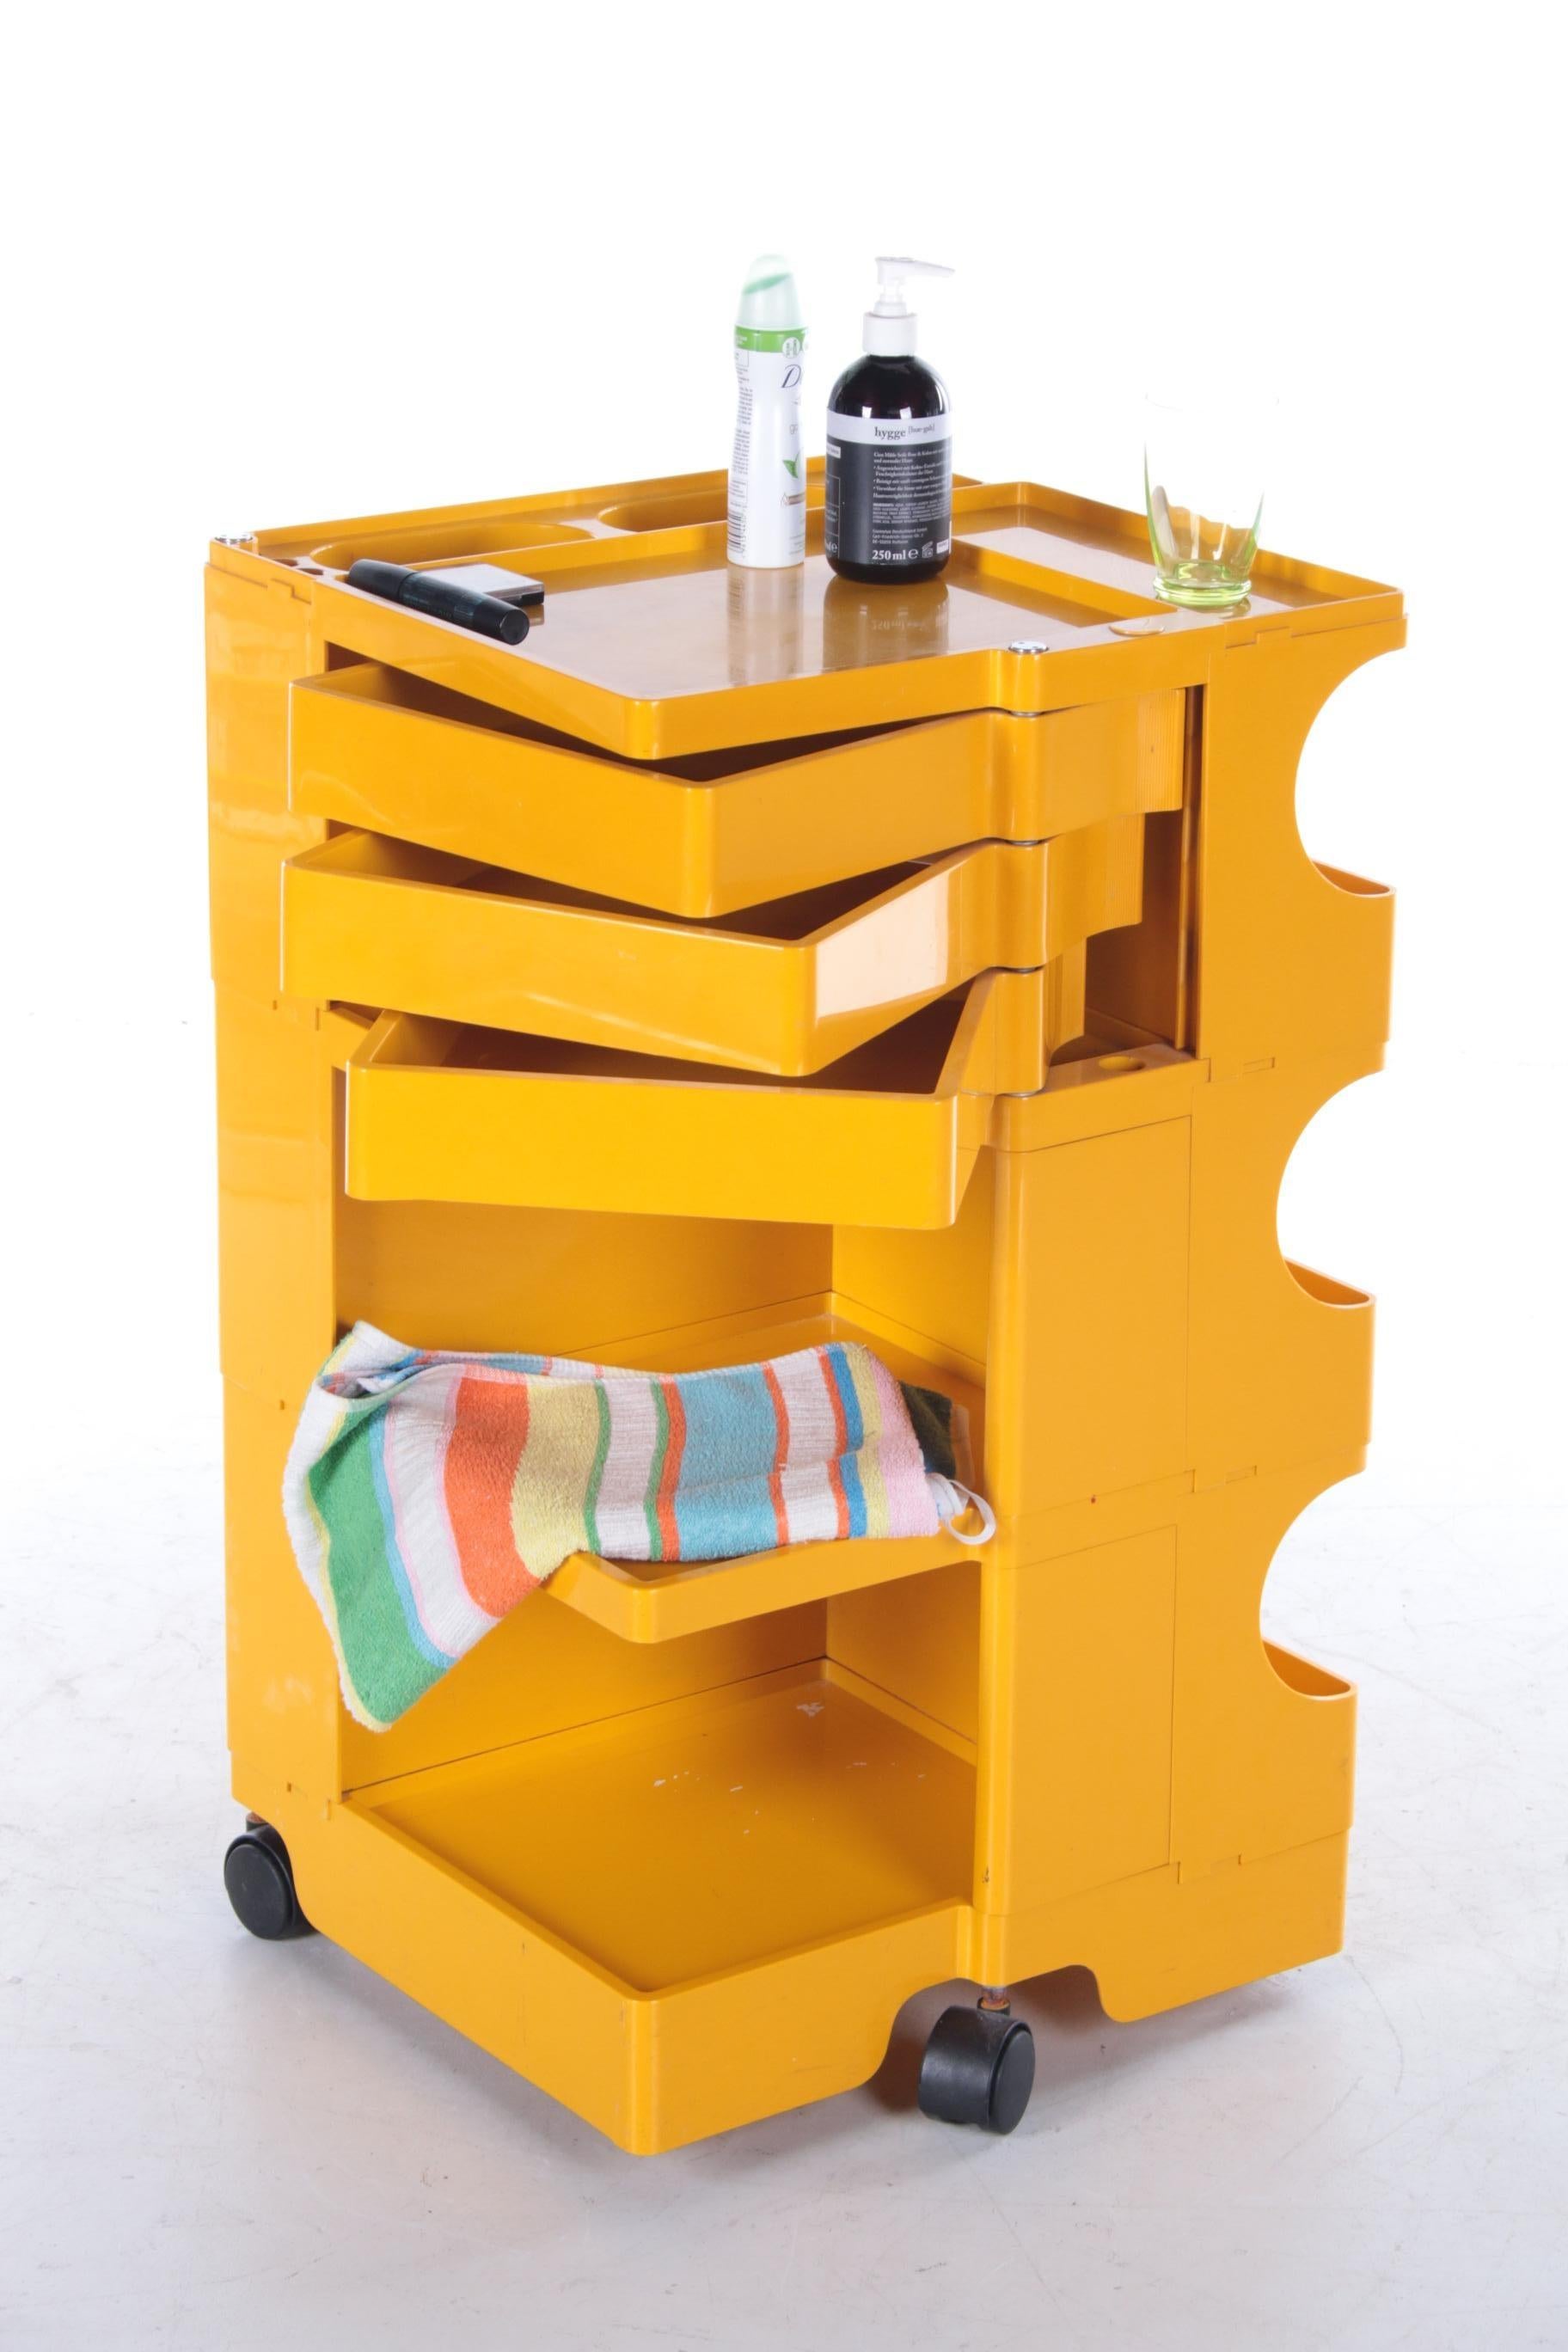 Space Age yellow Joe Colombo 'Boby' storage trolley, 1970s


This unique bright yellow 'Boby' trolley from Joe Colombo will be a real eye-catcher in your interior. The trolley was produced by Bieffeplast around the 1970s.

Joe Colombo is known